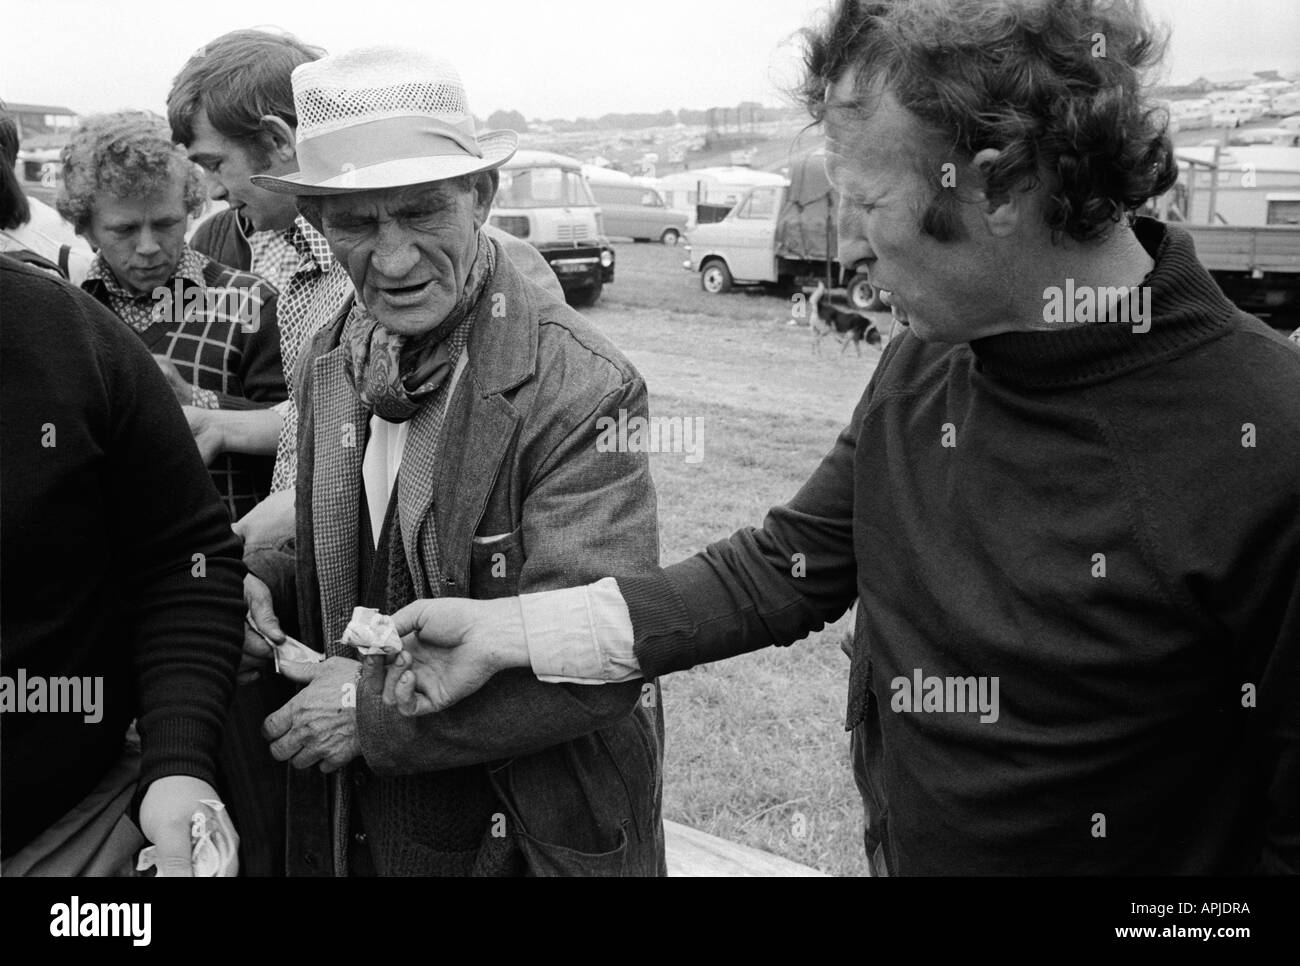 Money changing hands  a payment Gypsies at the  Derby Day horse race Epsom Downs Surrey England 1974. Illegal gambling. 1970s UK HOMER SYKES Stock Photo